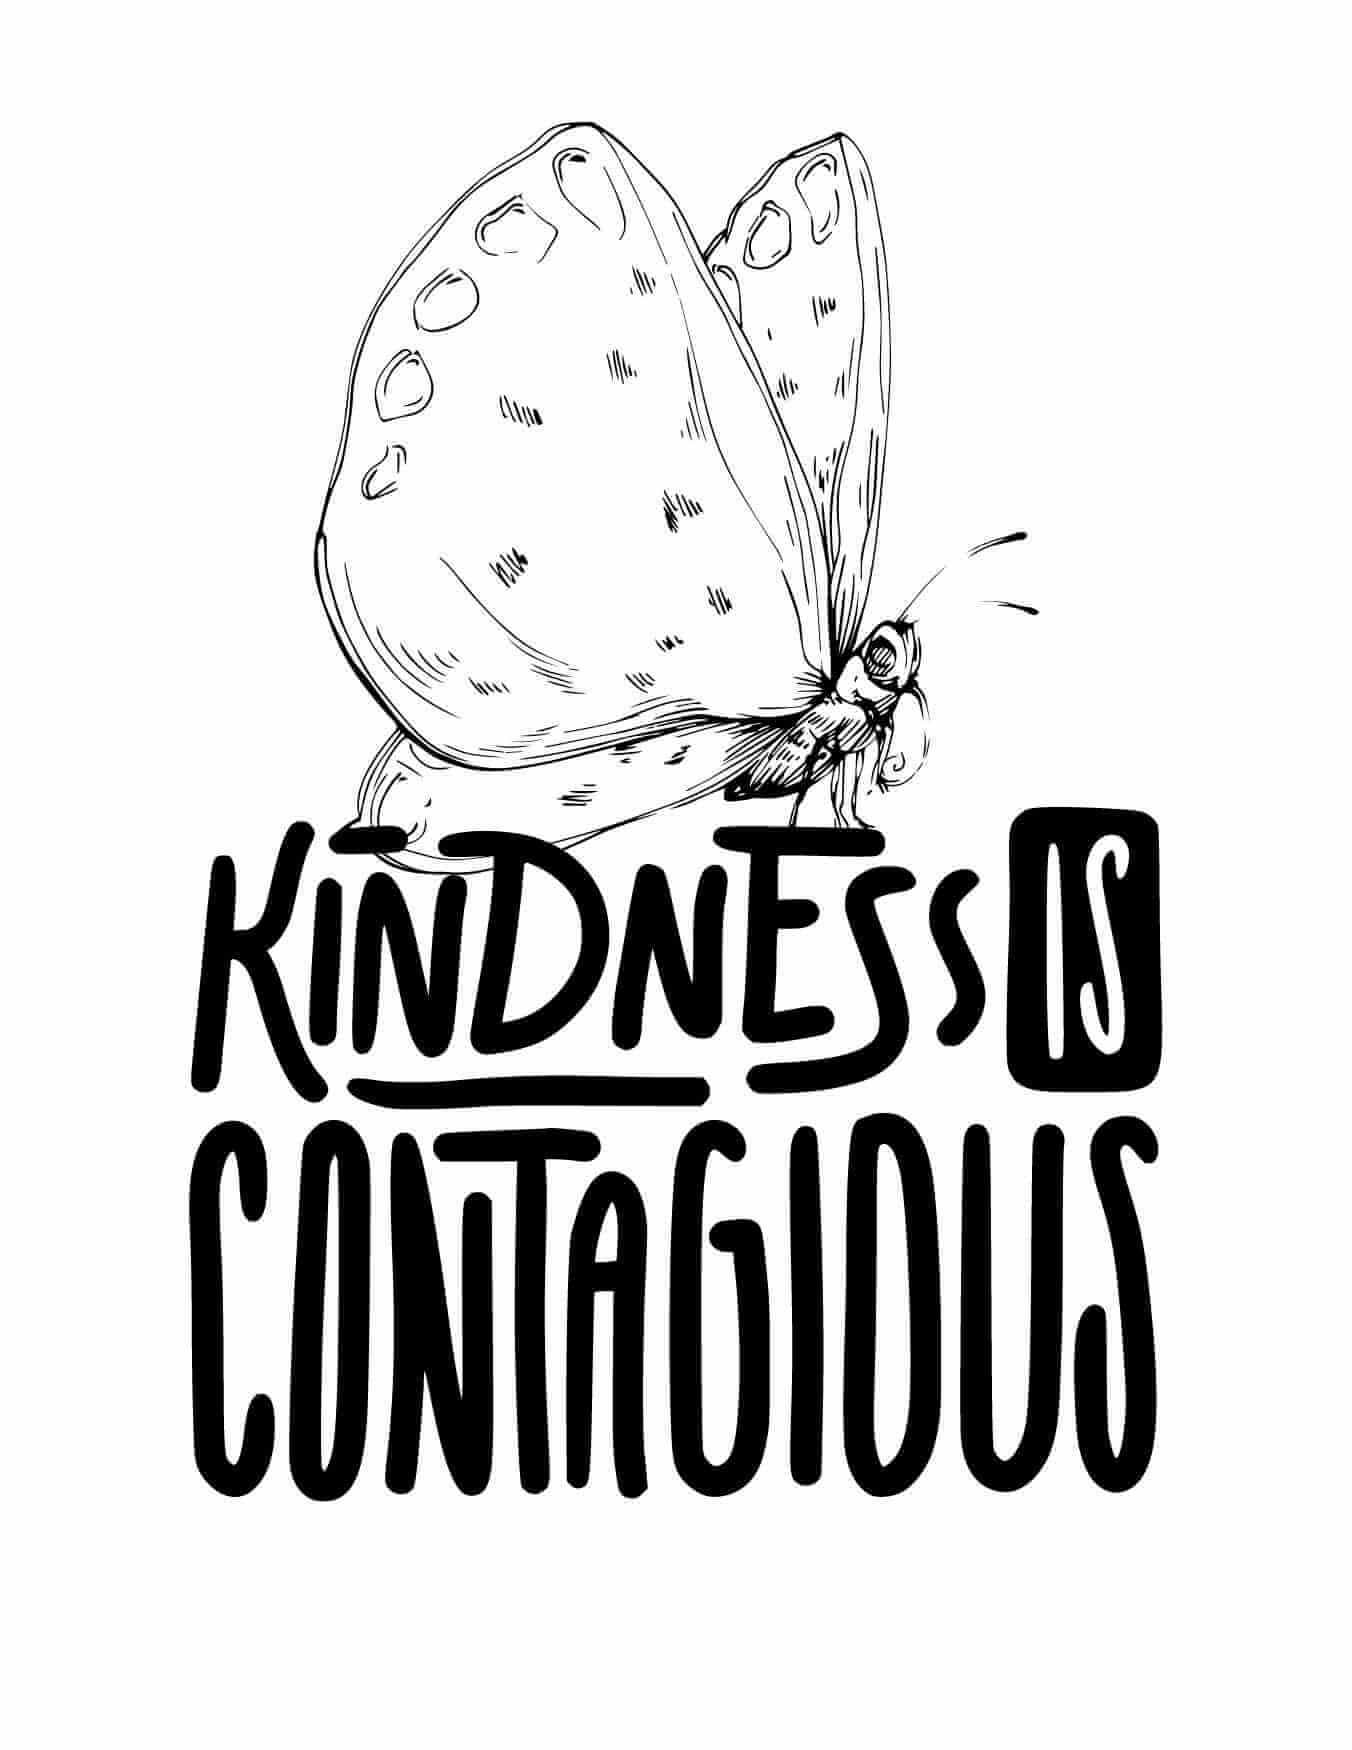 A coloring page with a large beautiful butterfly for coloring over black text that reads "kindness is contagious."